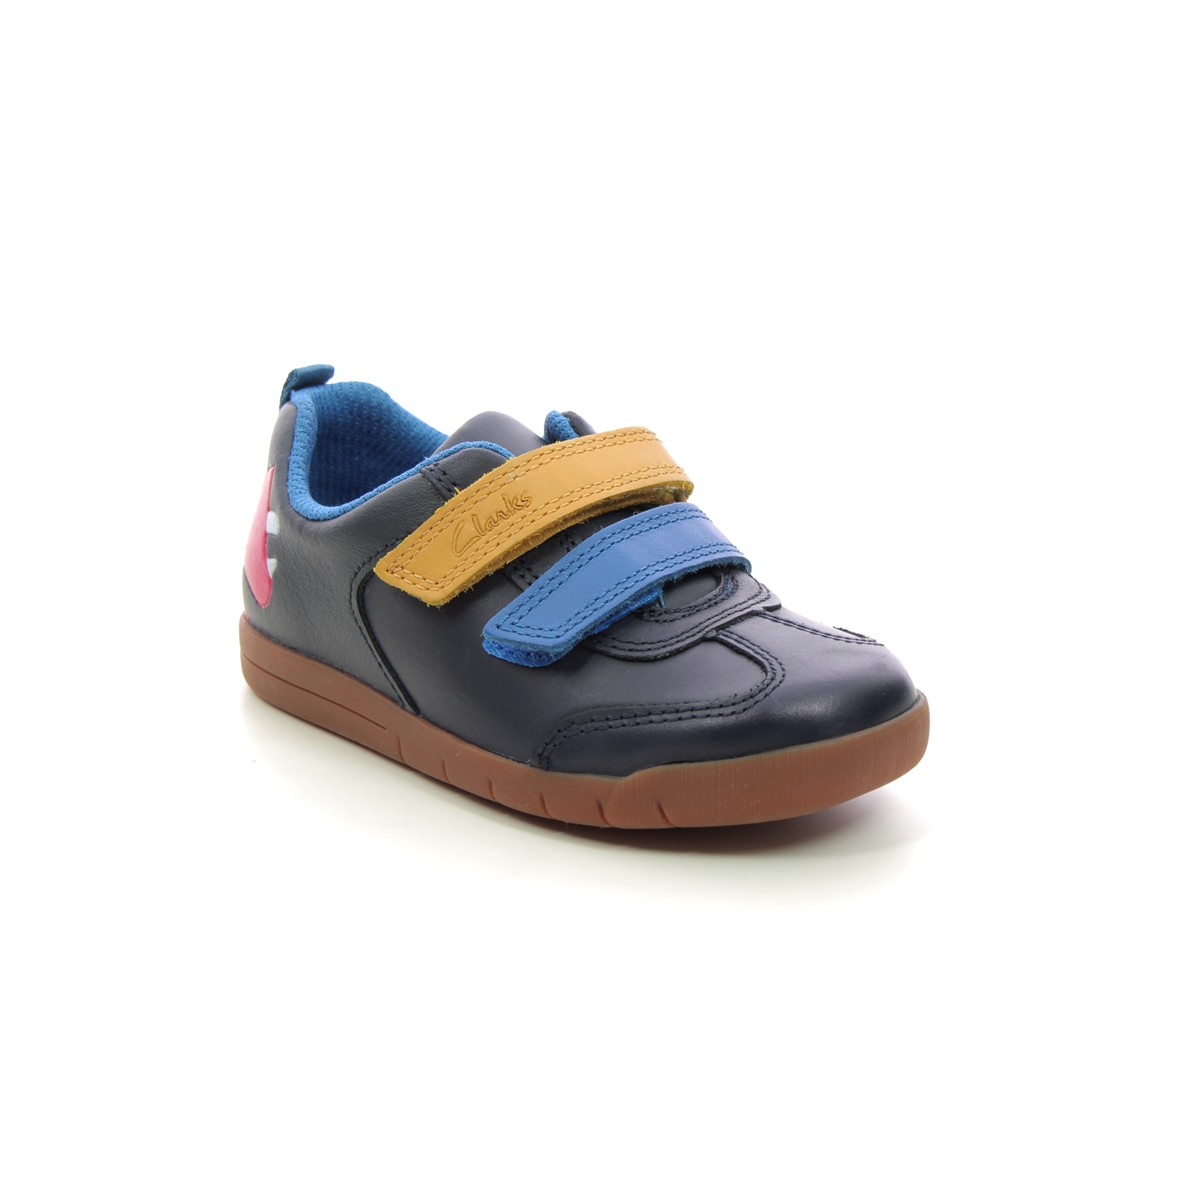 Clarks Den Play T Navy Leather Kids Boys Toddler Shoes 7159-06F in a Plain Leather in Size 6.5